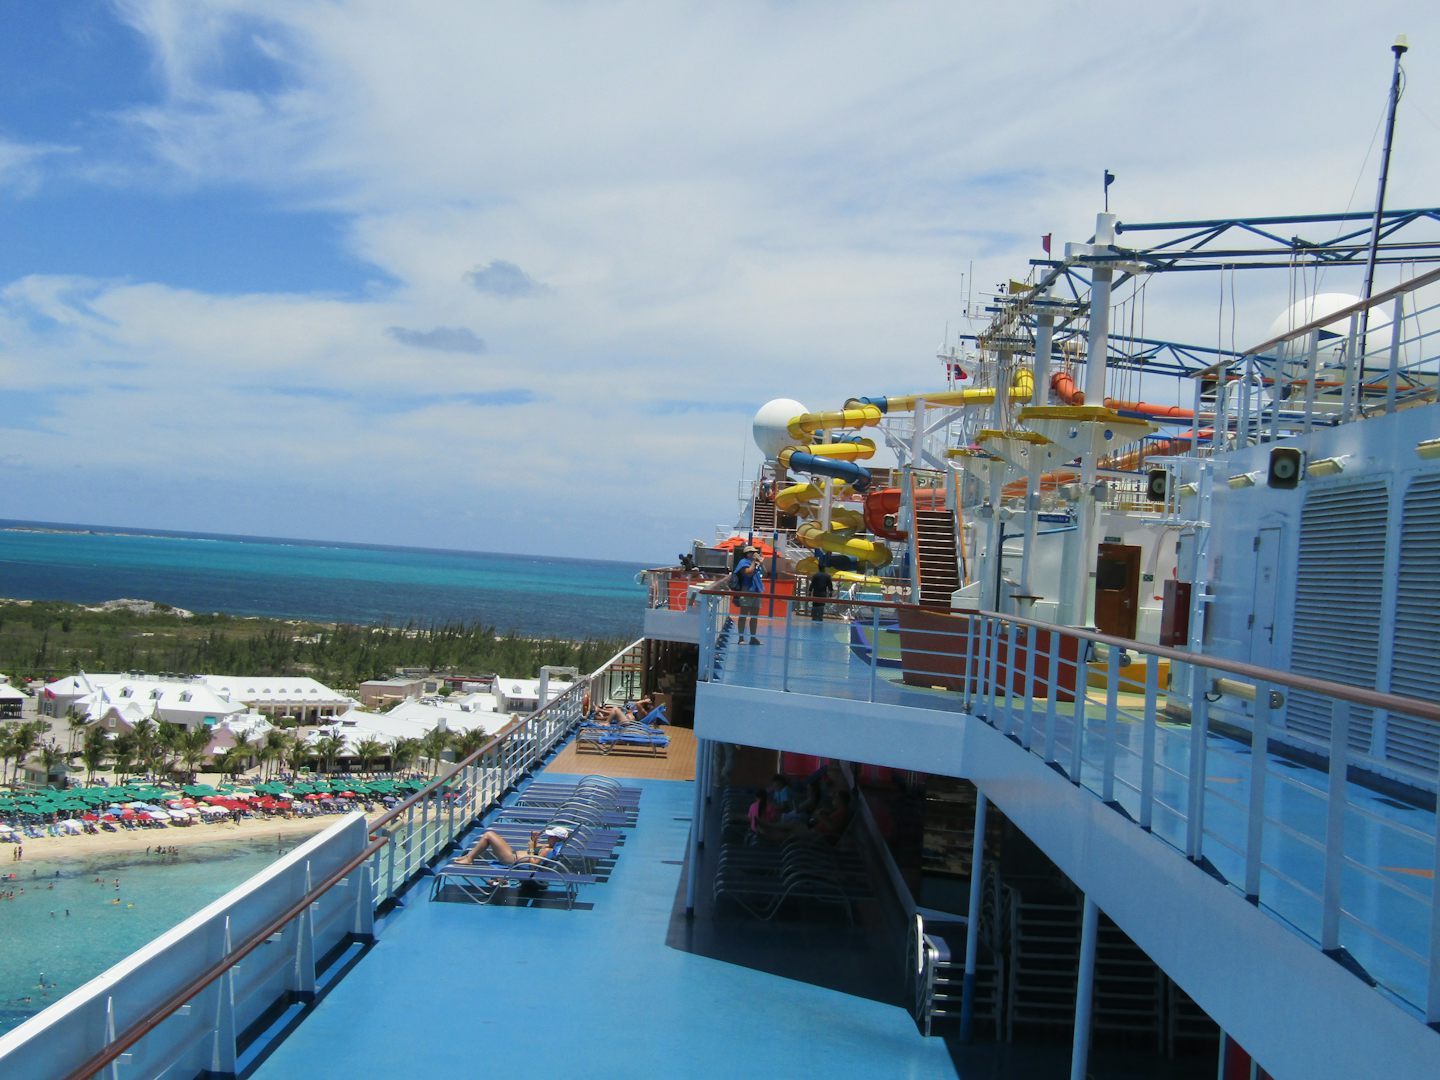 Water Park on the top of the ship.